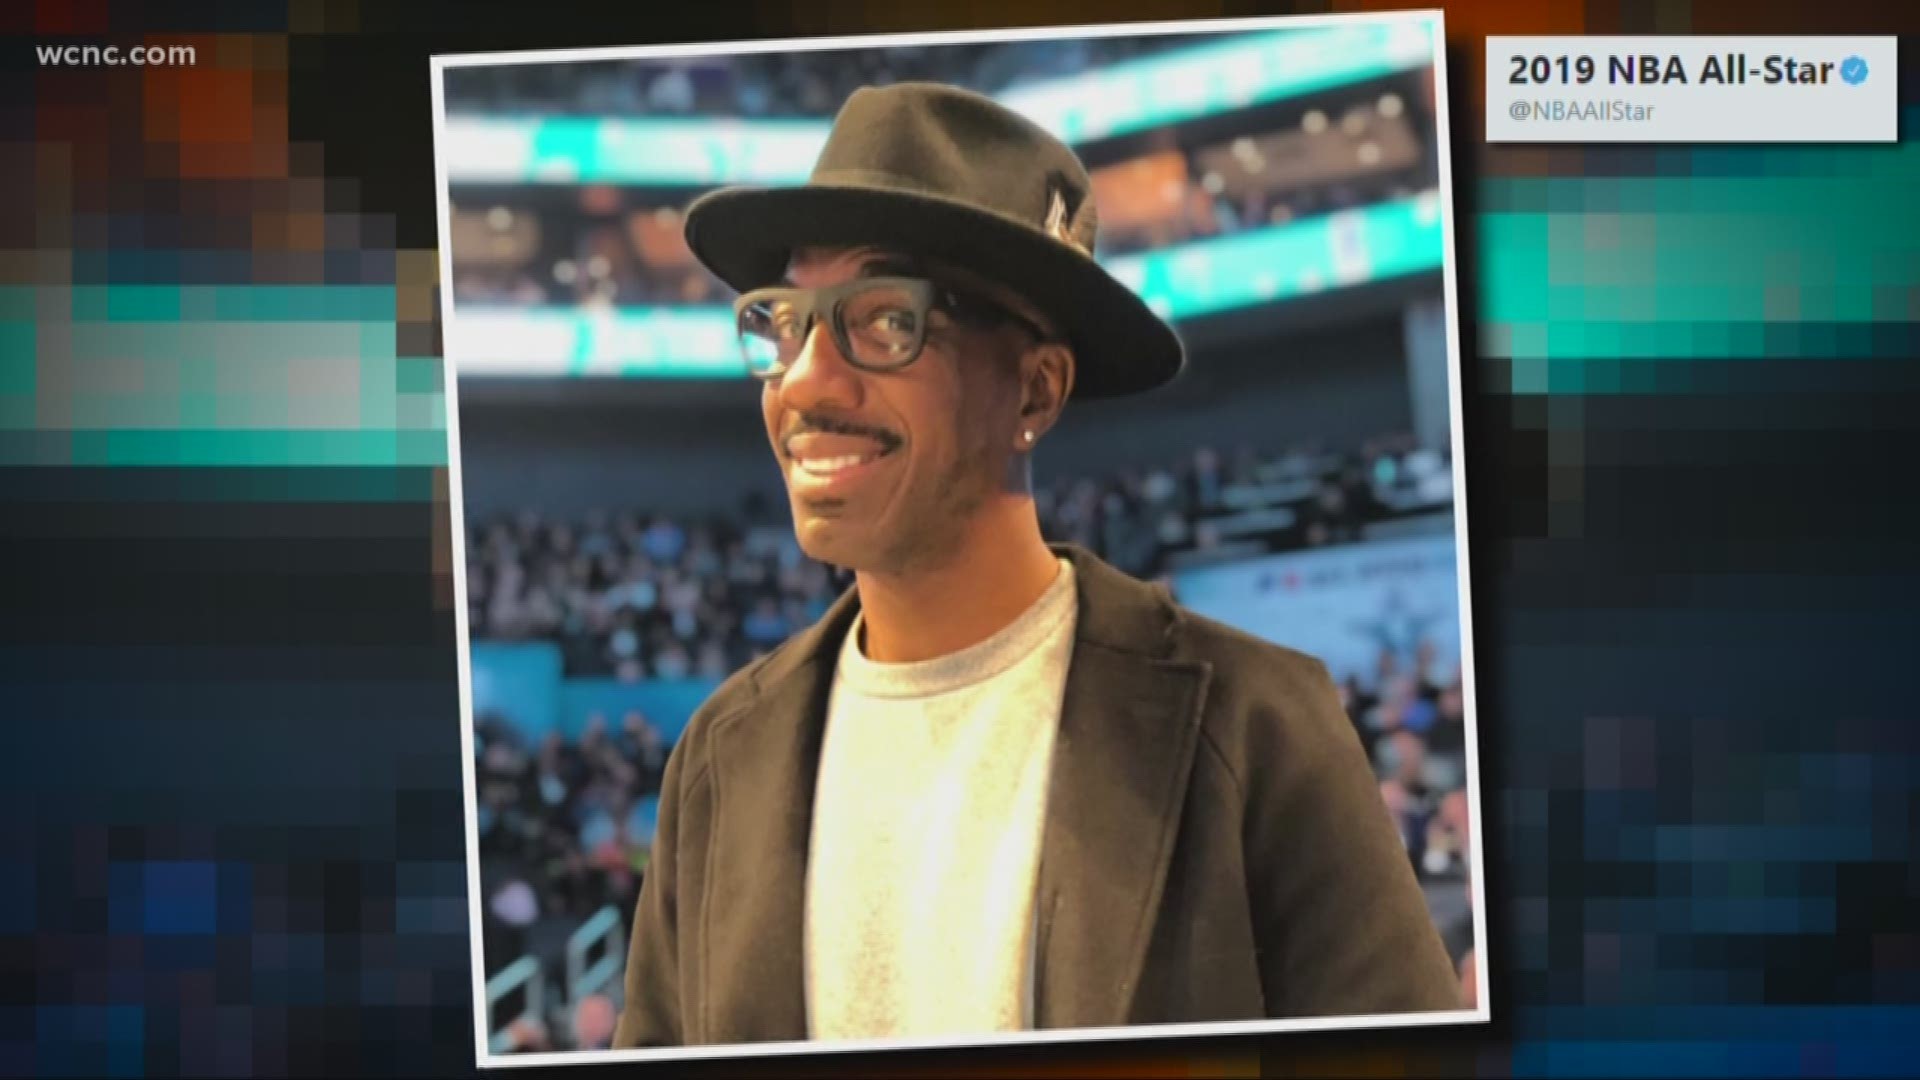 Dozens of celebrities were in Charlotte for All-Star Weekend, visiting clubs, restaurants, and even the mall. Many of them made their way to the Spectrum Center for the big game.